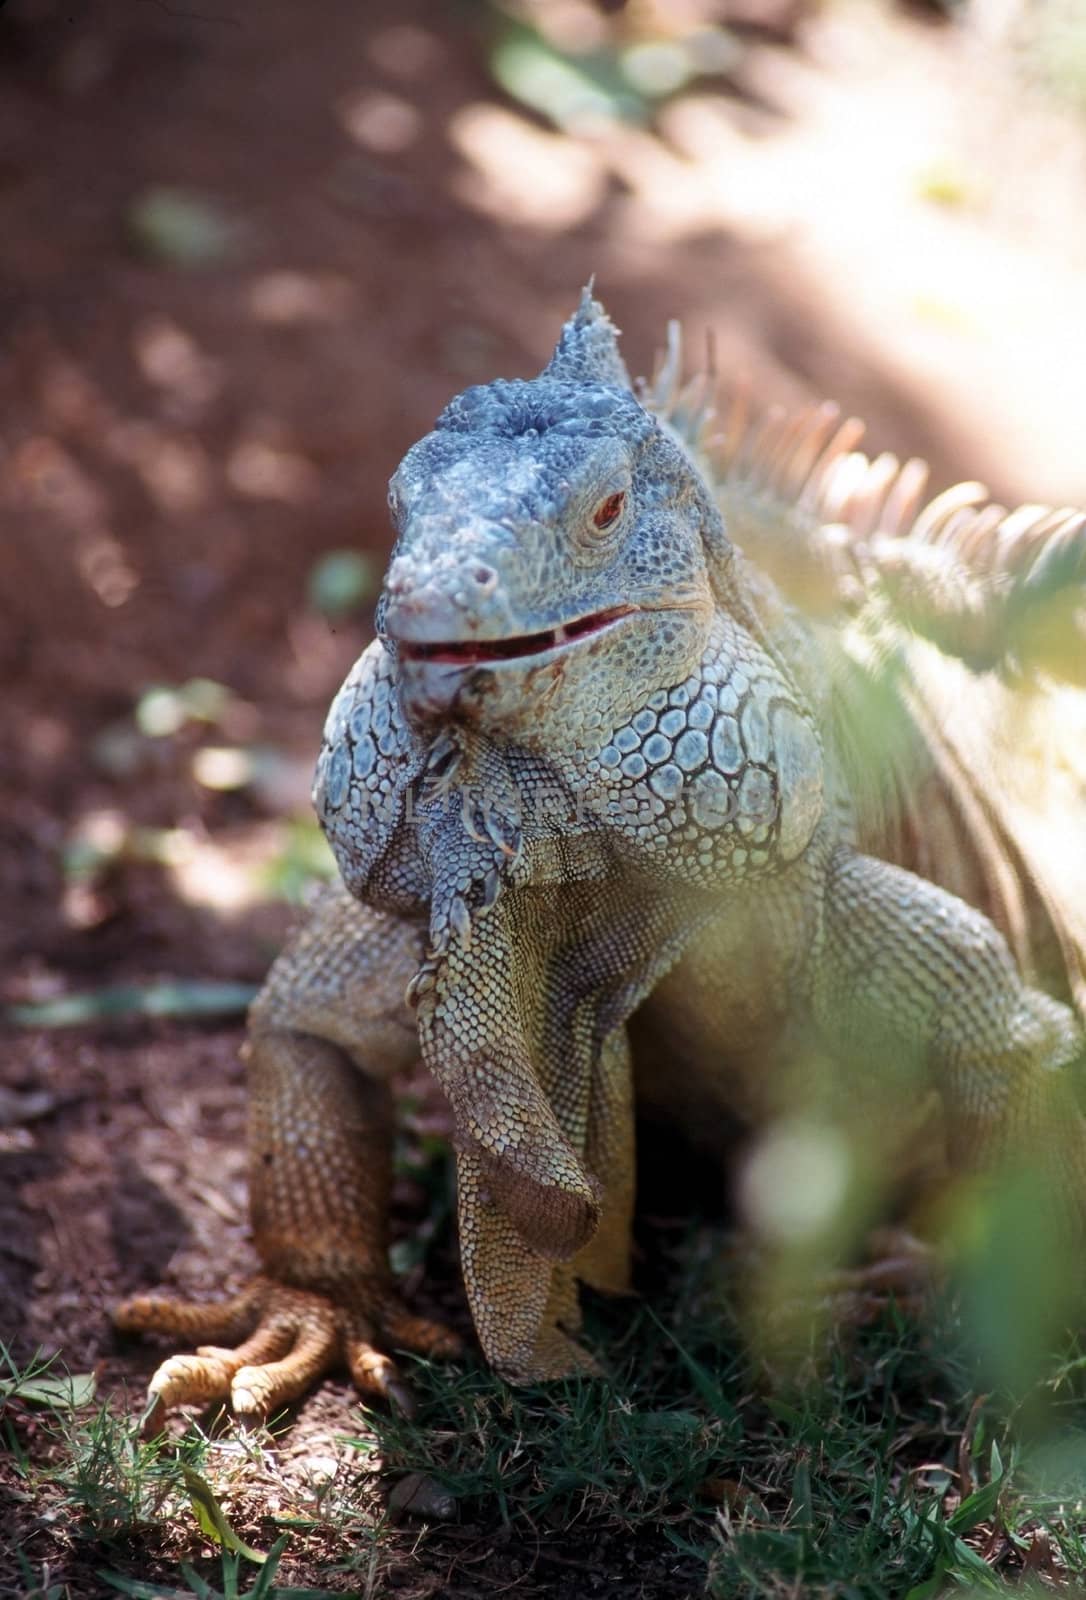 The green iguana is a reptile found throughout Central and South America.